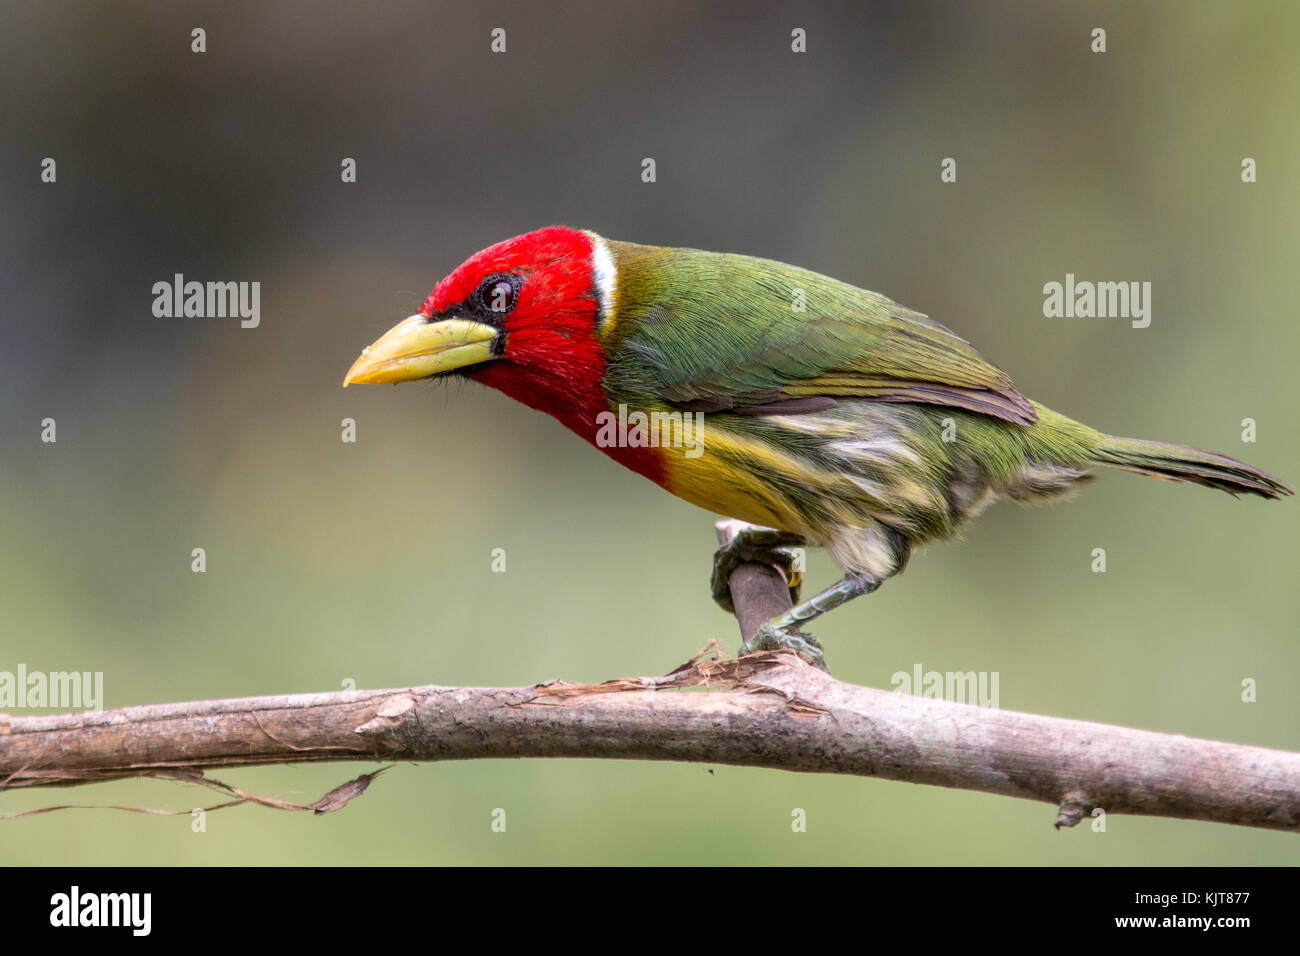 A Red-headed barbet perched in the Tandayapa Valley of Northern Ecuador. Stock Photo